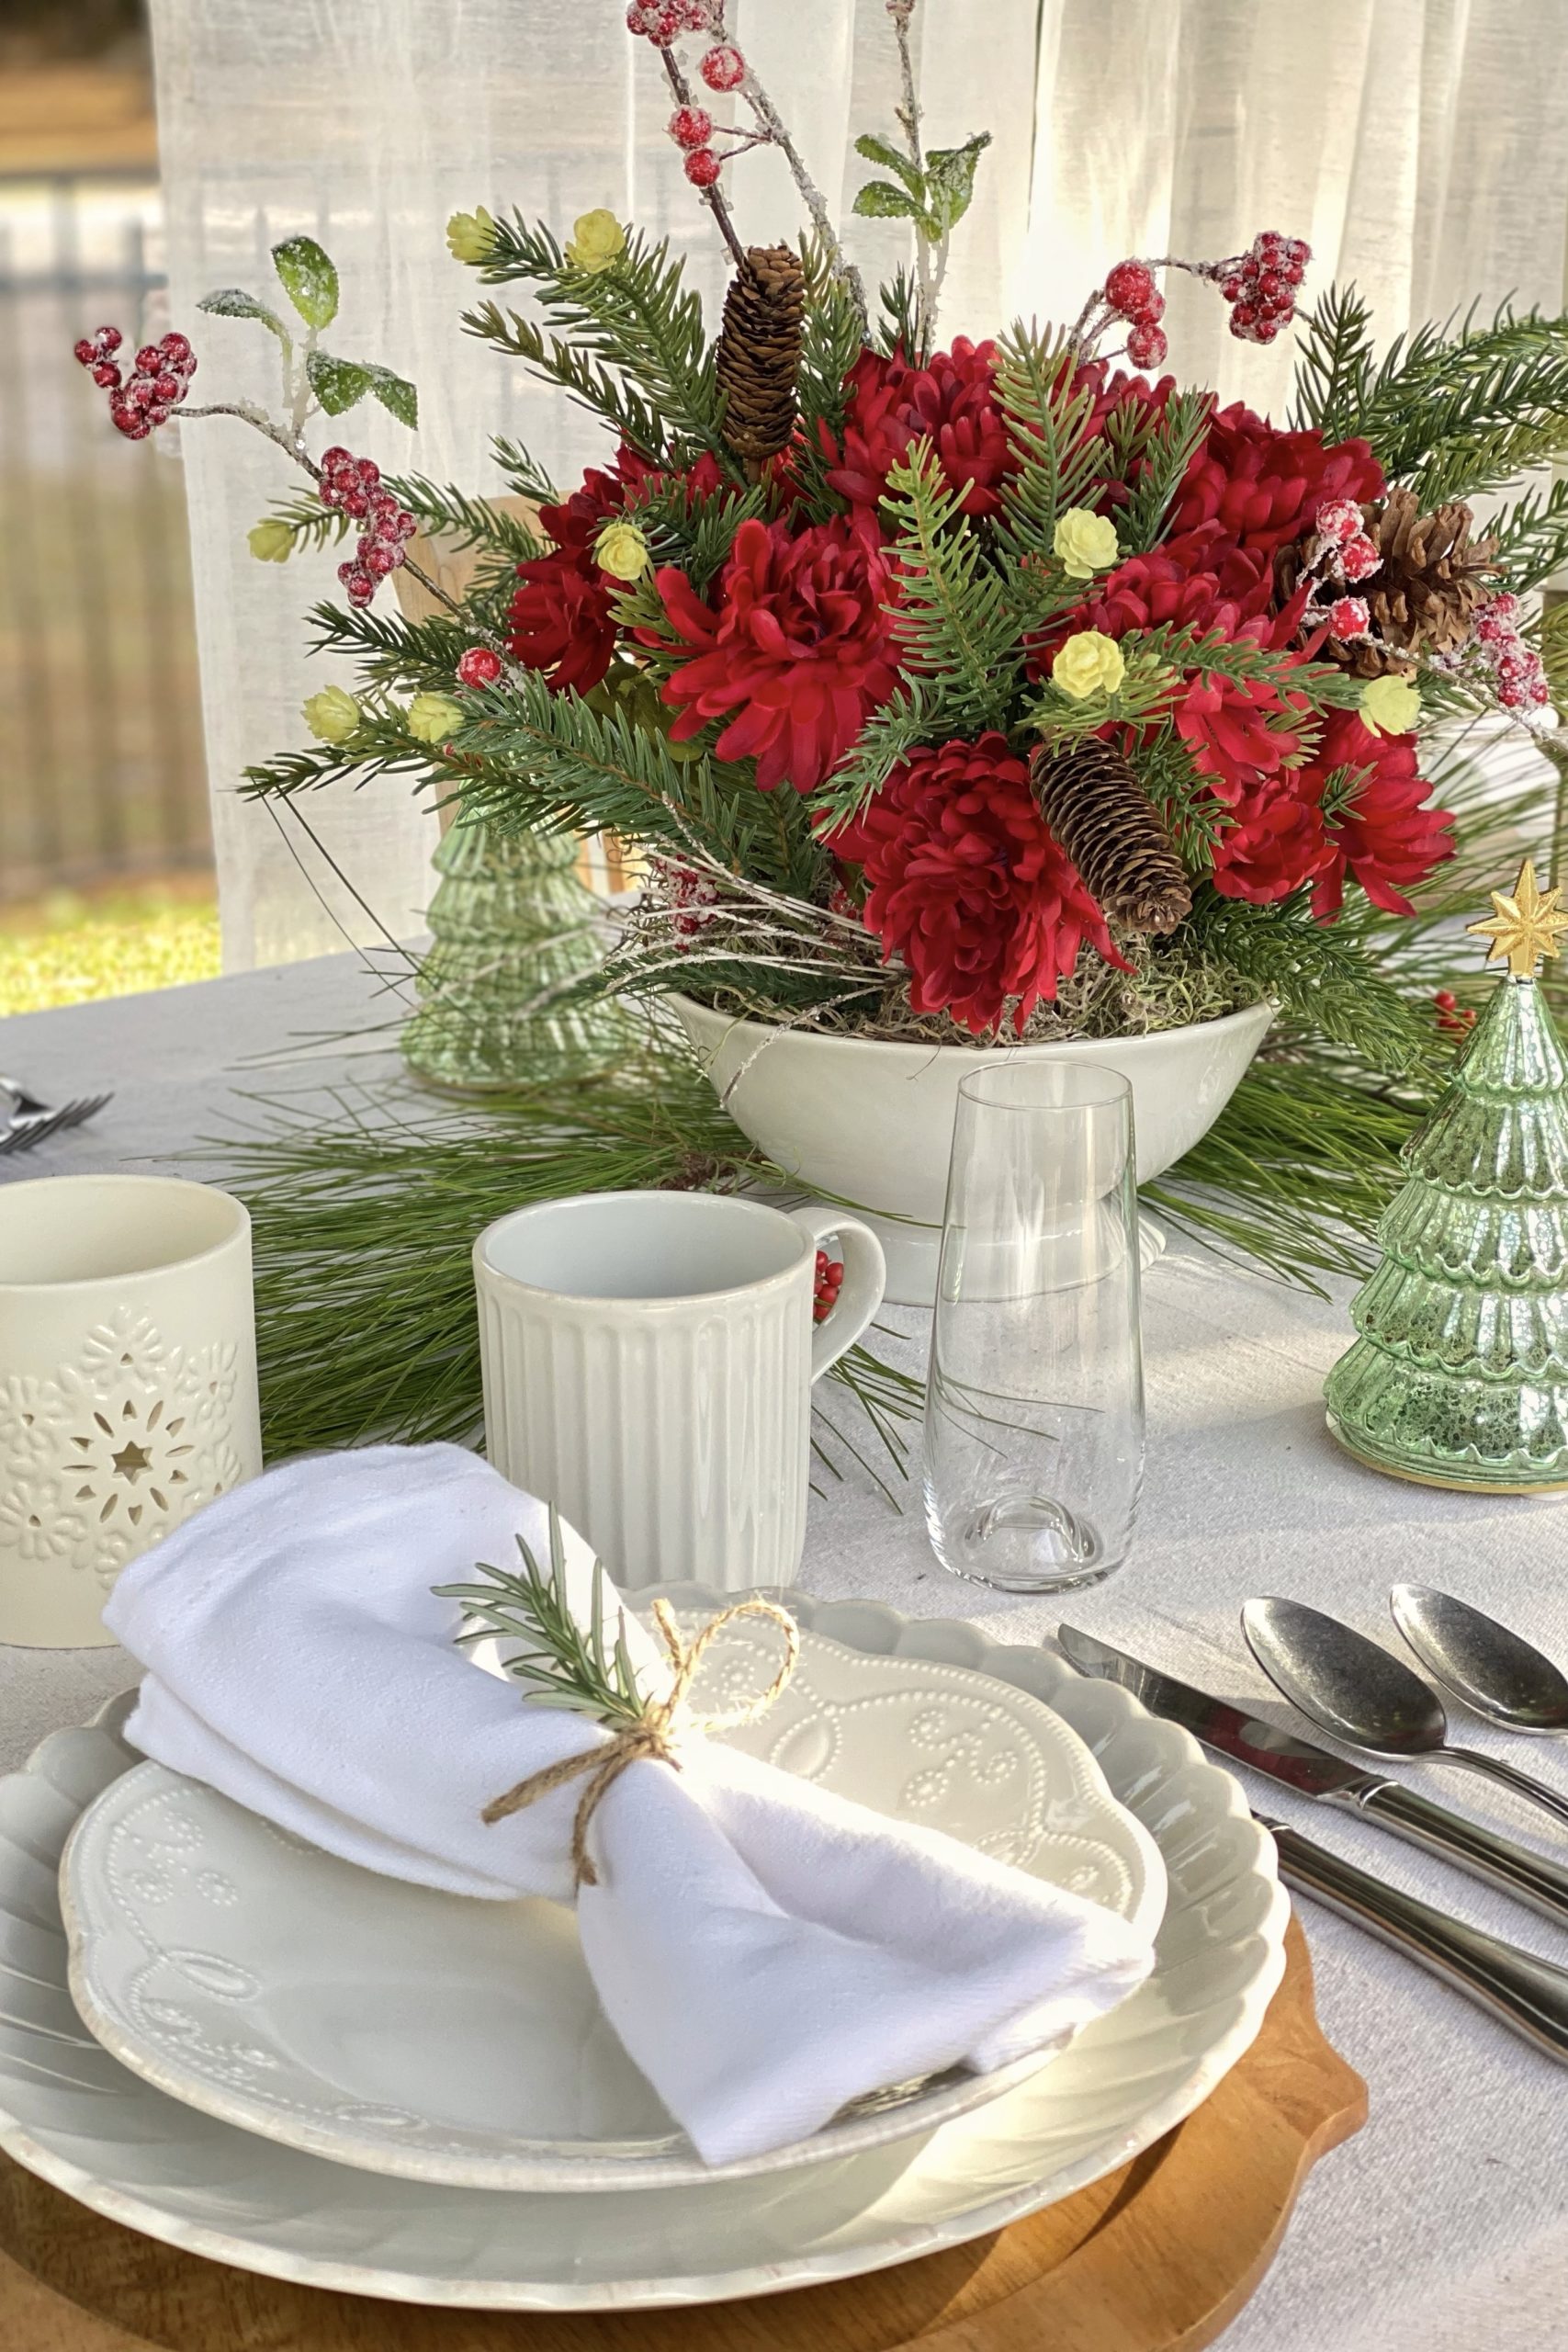 Holiday table setting featuring Lenox tableware and a Christmas floral arrangement.